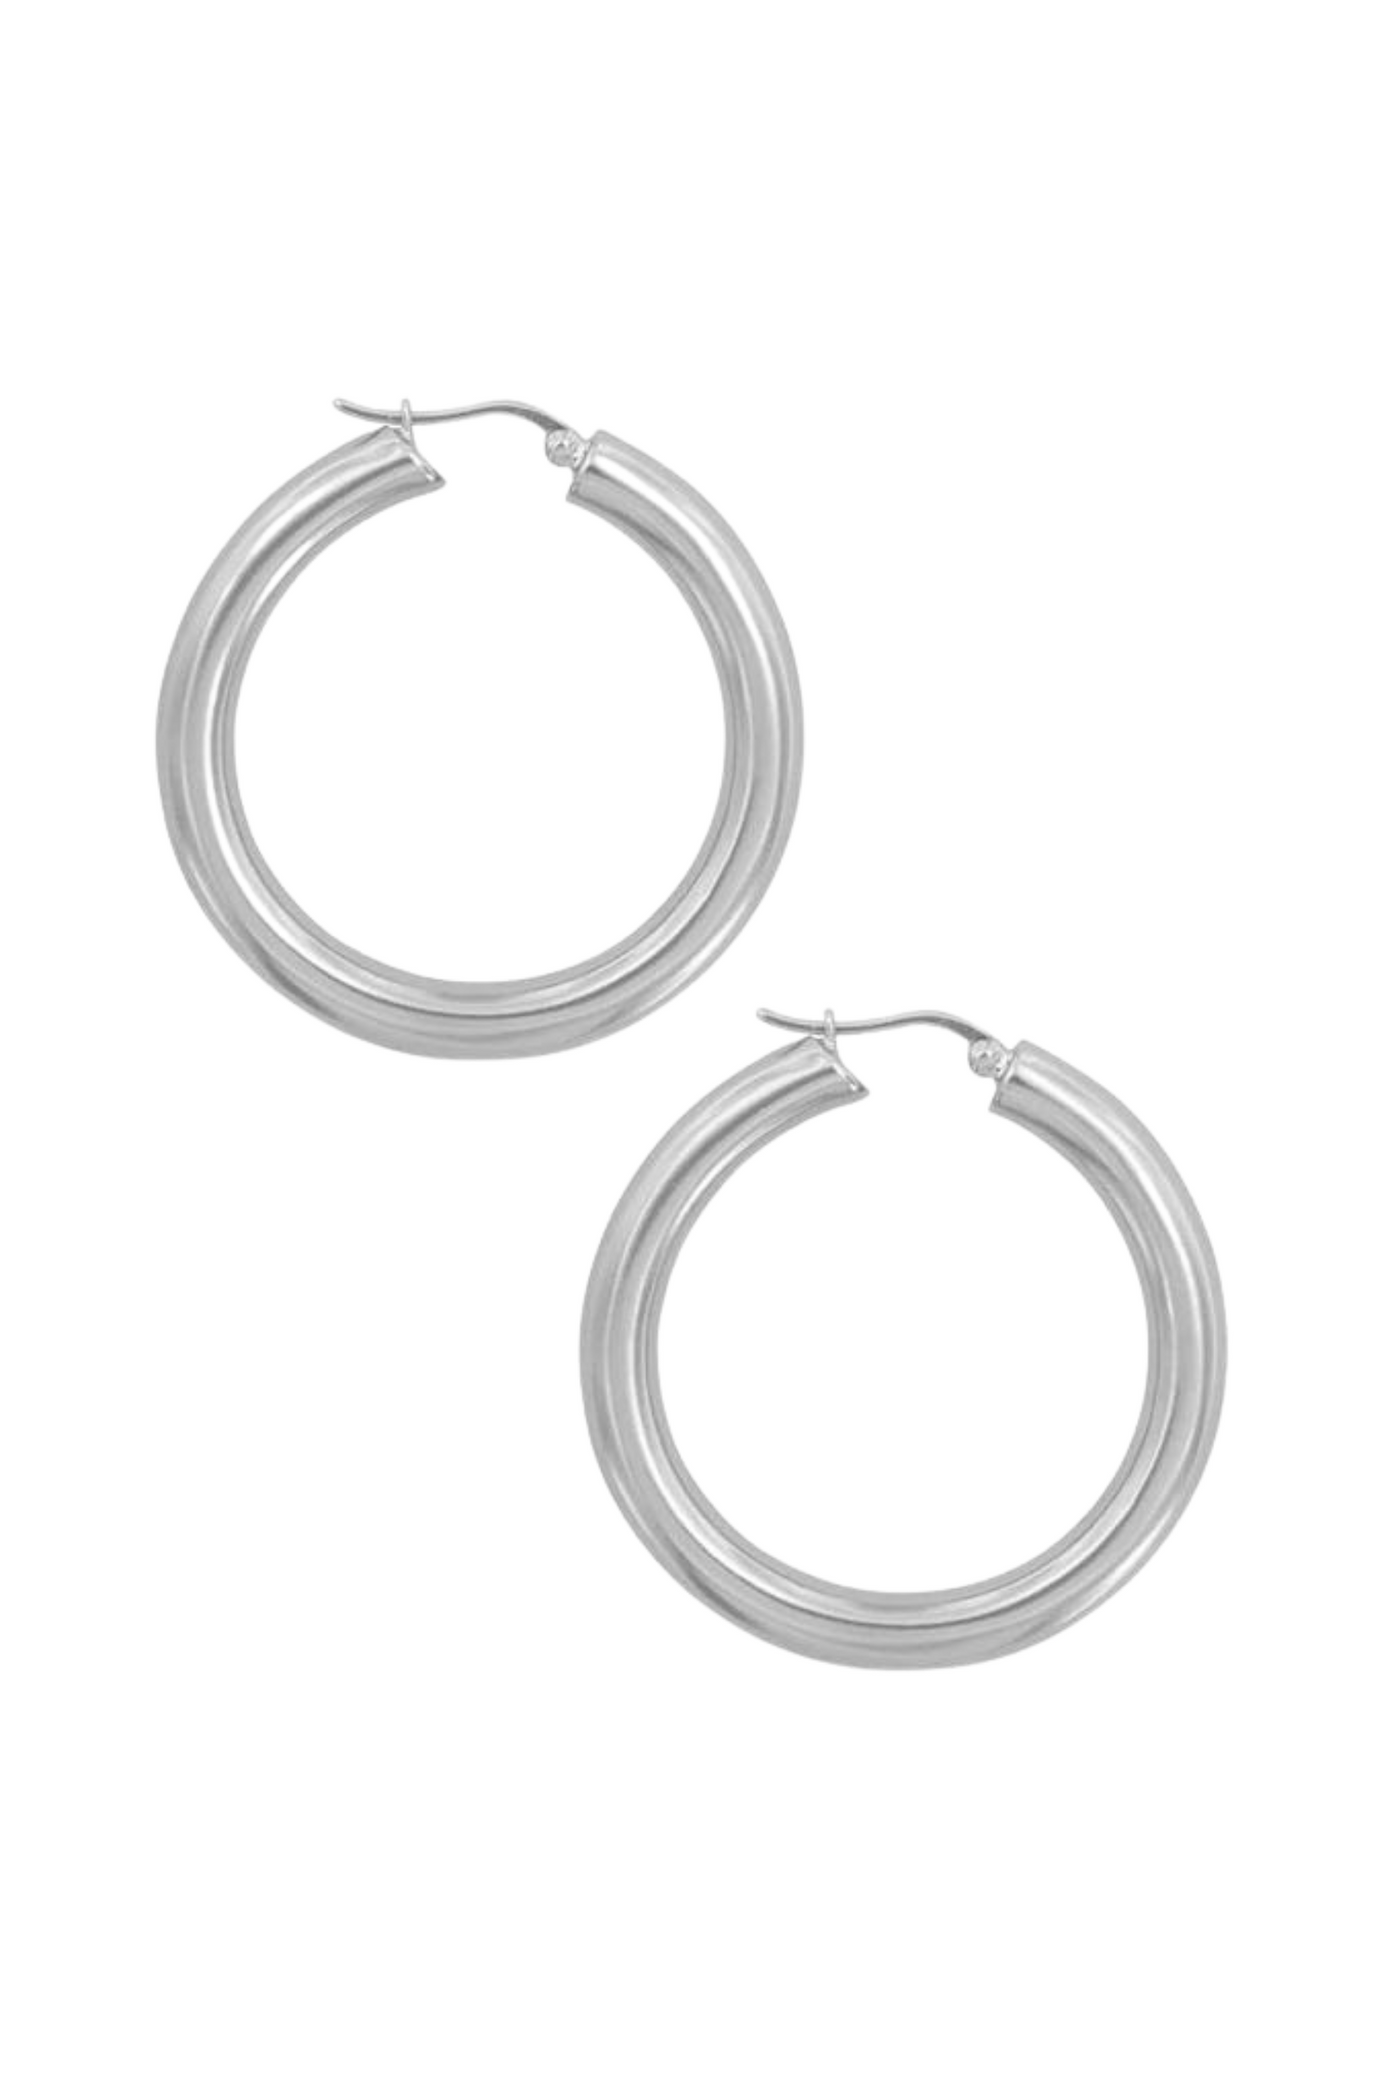 Pyar Jupiter Silver Hinged Hoop Earrings, available on ZERRIN with free shipping in Singapore